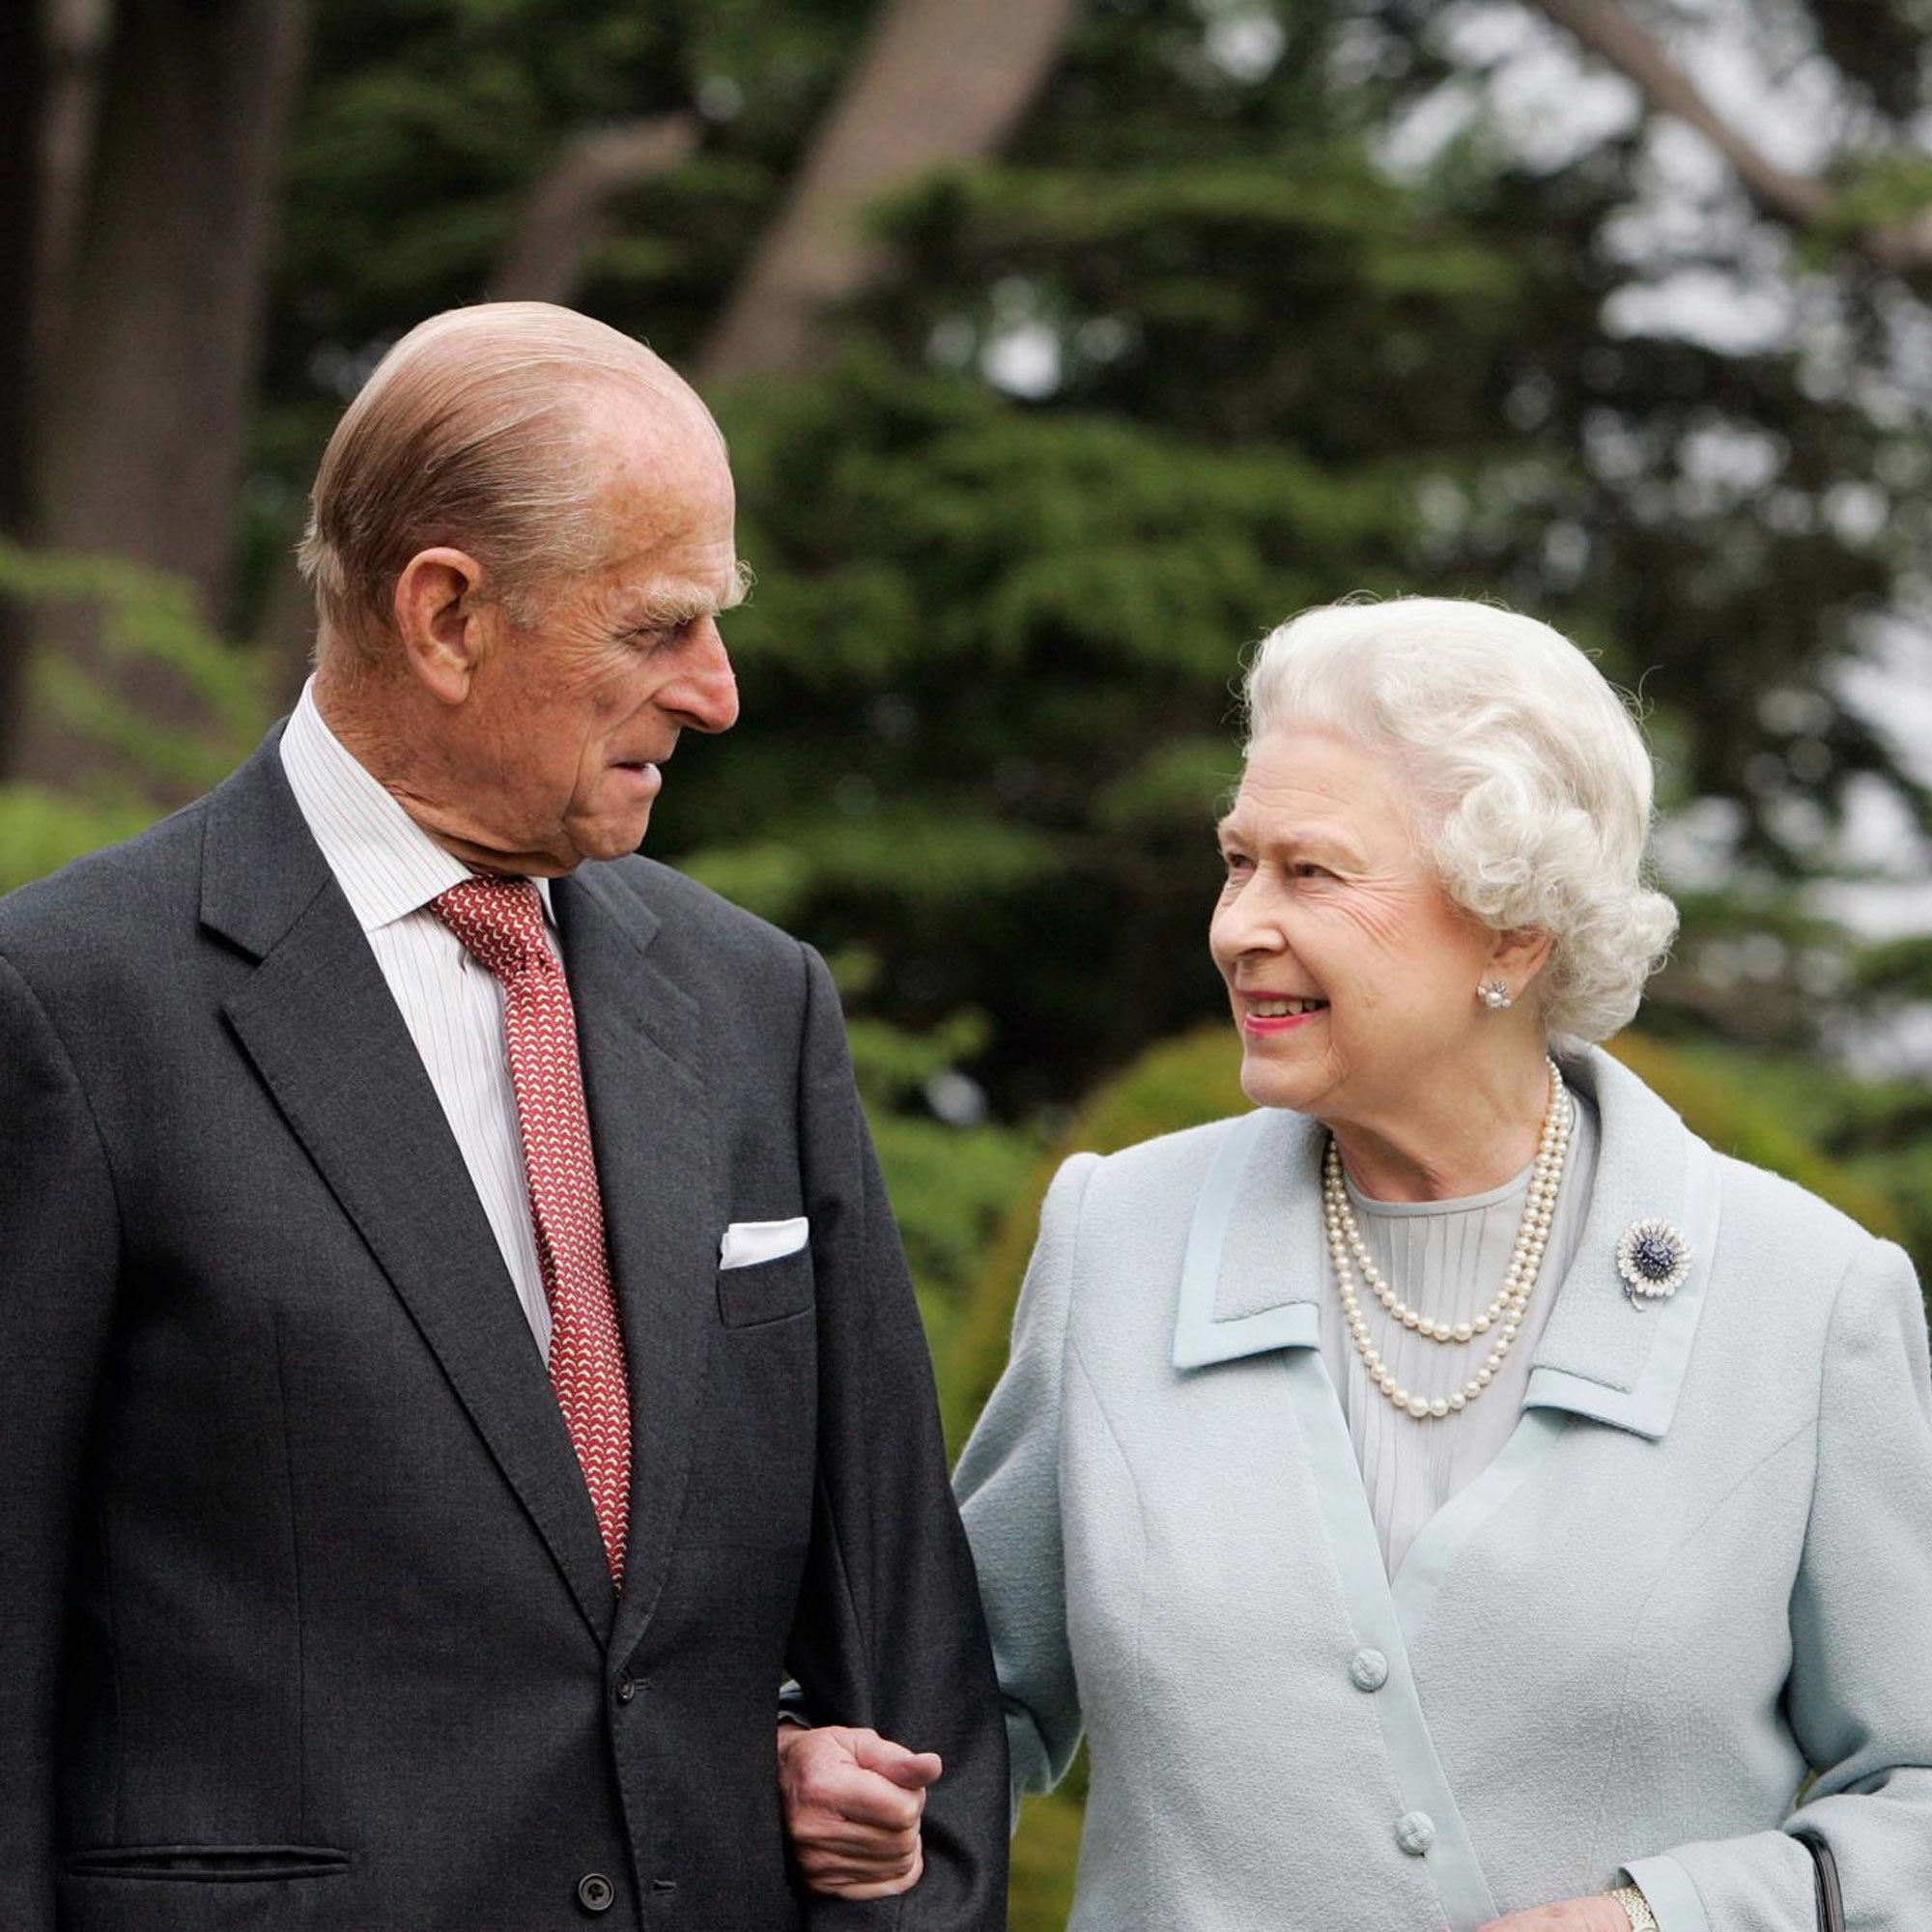 The Queen was laid to rest with her late husband, Prince Philip